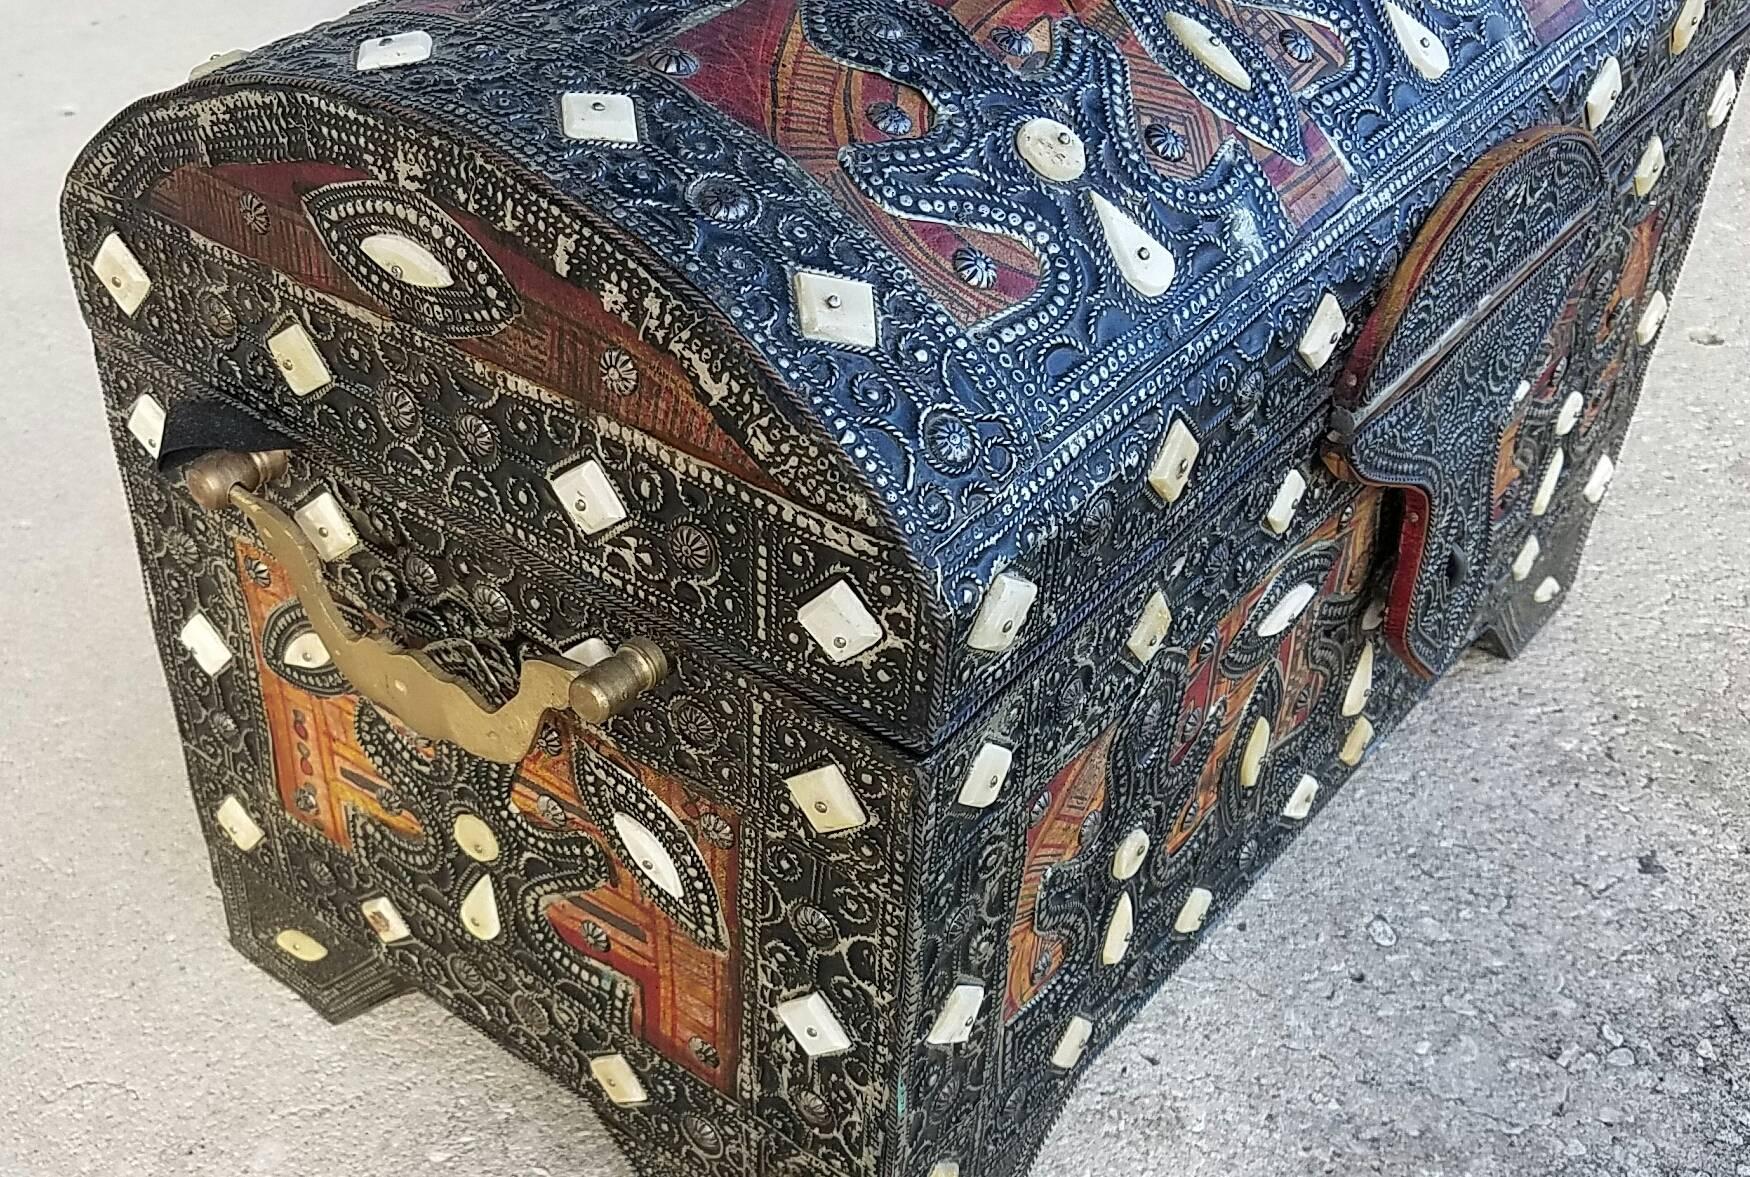 A beautiful Moroccan camel bone trunk from Marrakech. Camel bone dyed in Henna and colorful leather patches mixed with metal inlaid makes this trunk a great addition to any décor. Measuring approximately 21